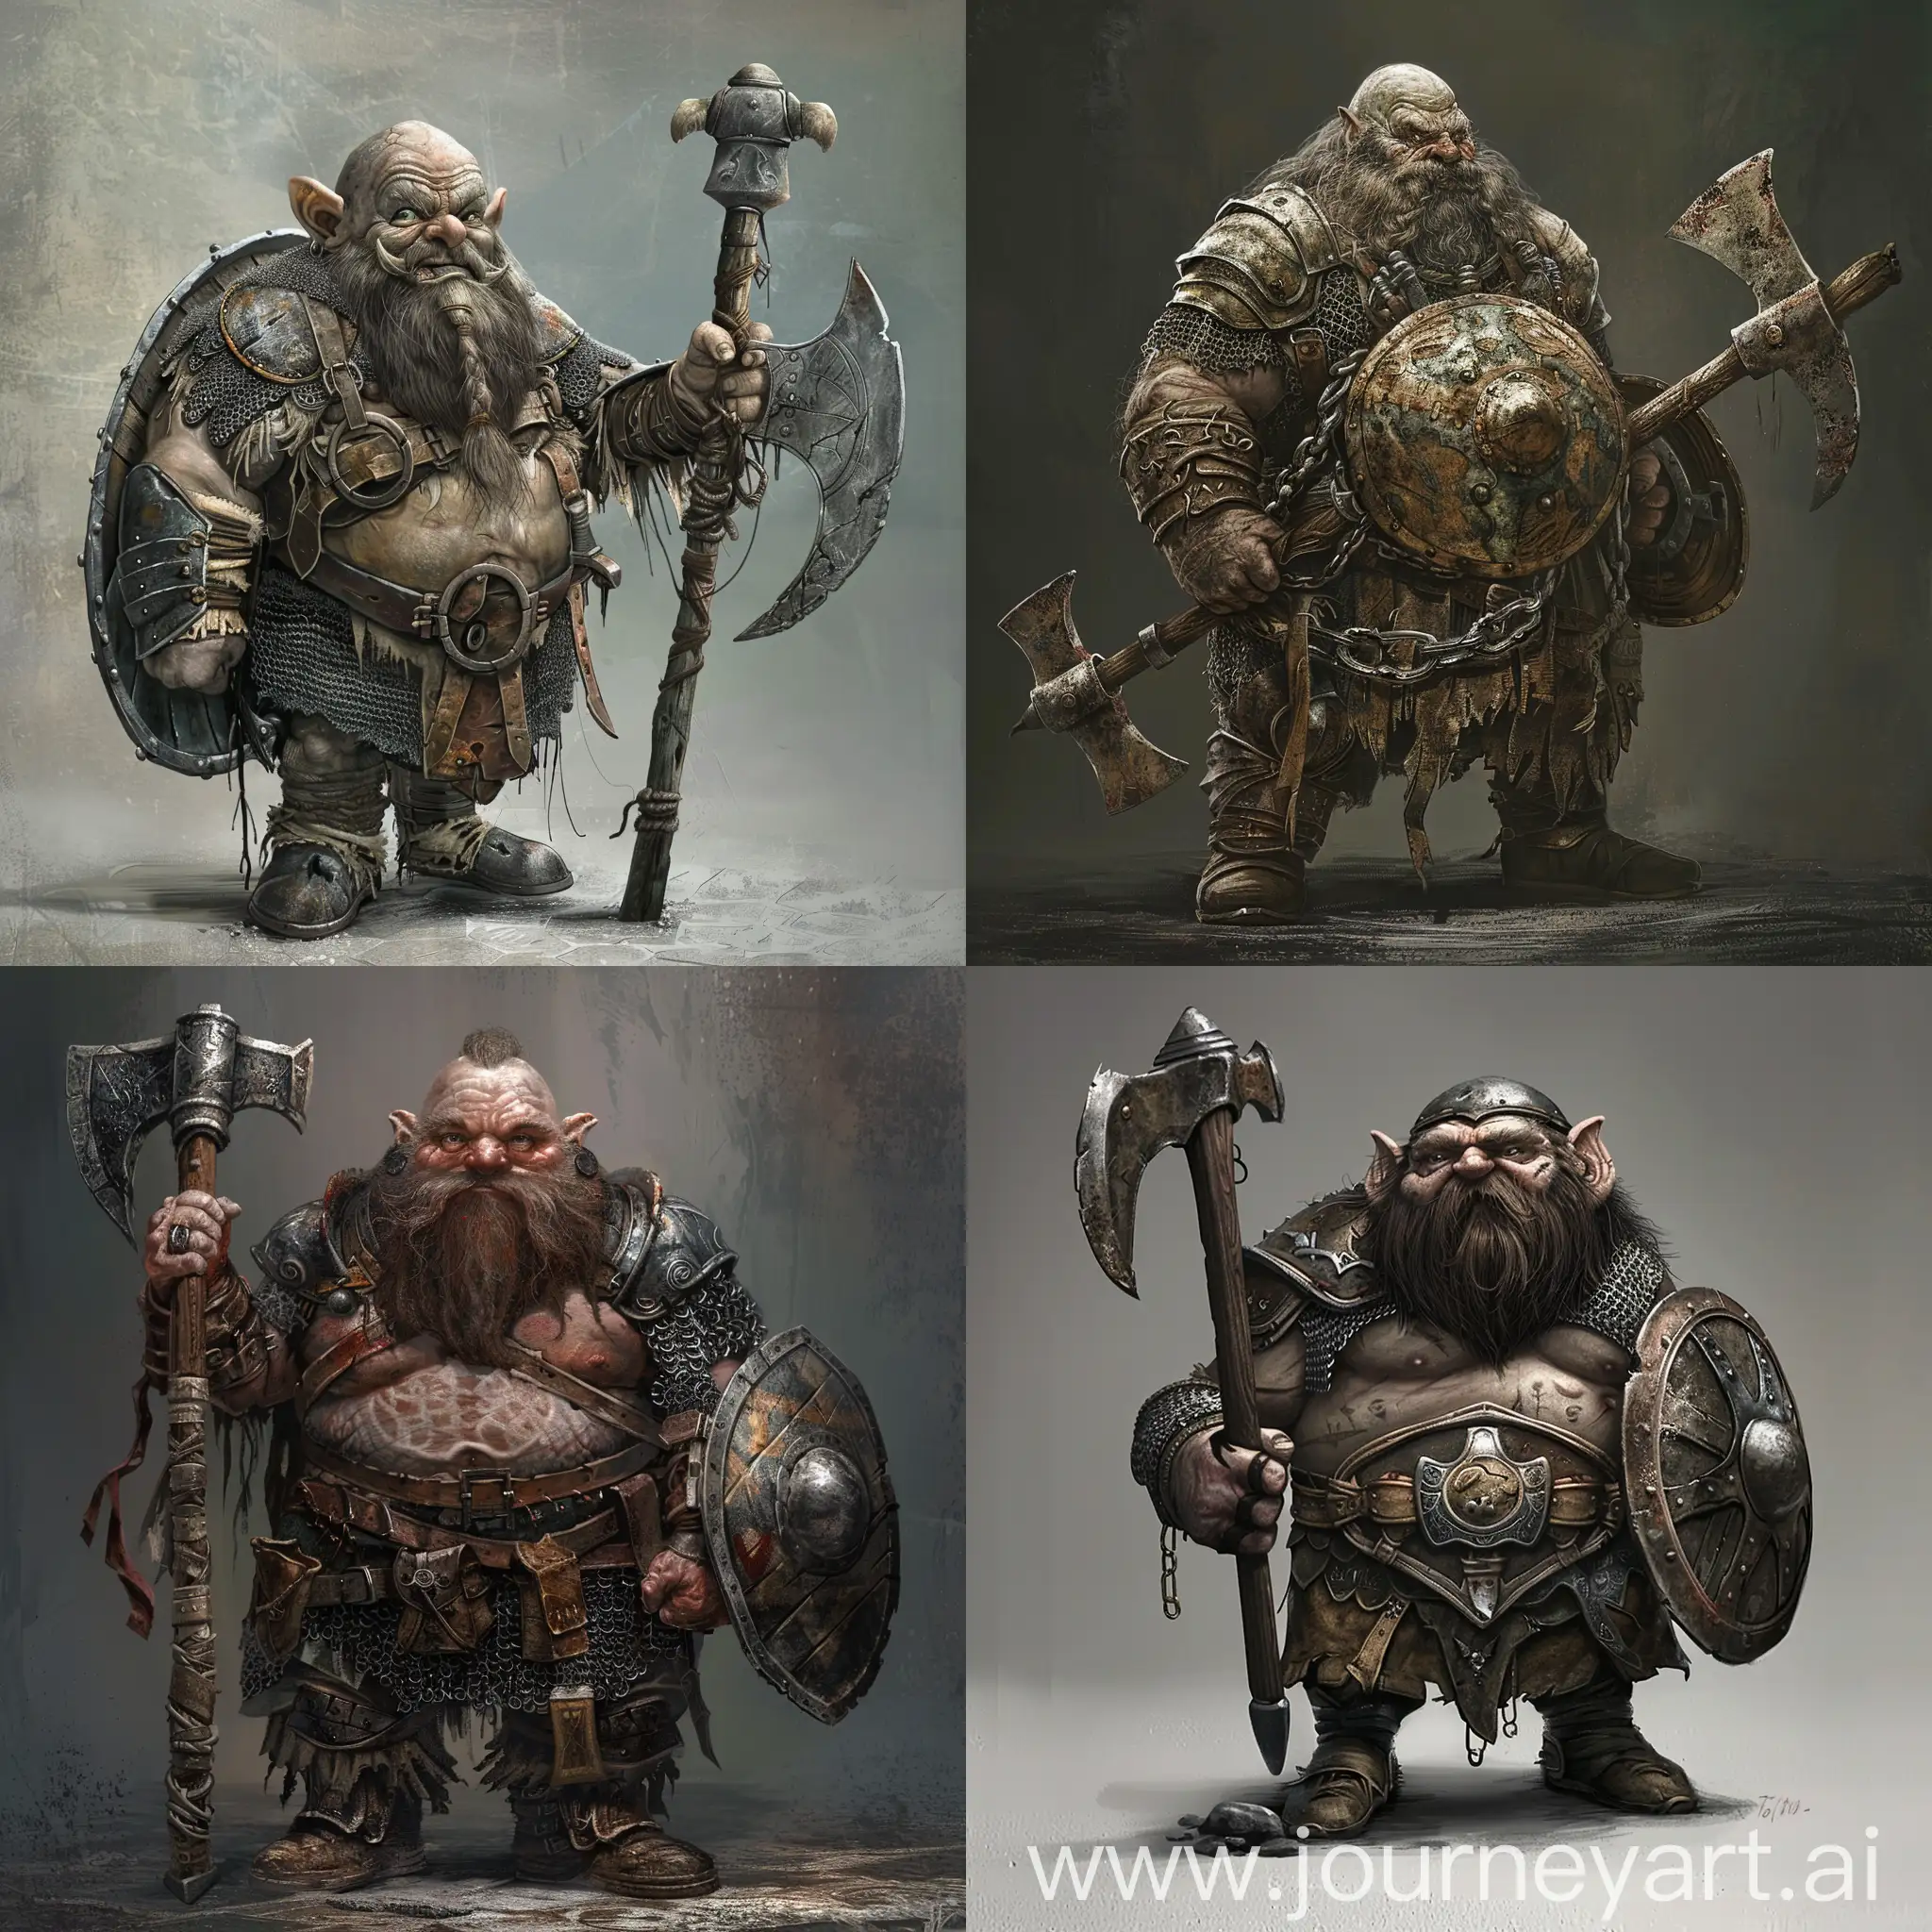 A human looking dwarf, 4 feet tall, obese, weighs 120kg, has a caved in chest, wears a full body chainmail that also covers his head, has a shield on his back, has a big 6 feet battleaxe, he is blind in one eye, he is extremely pale, long beard